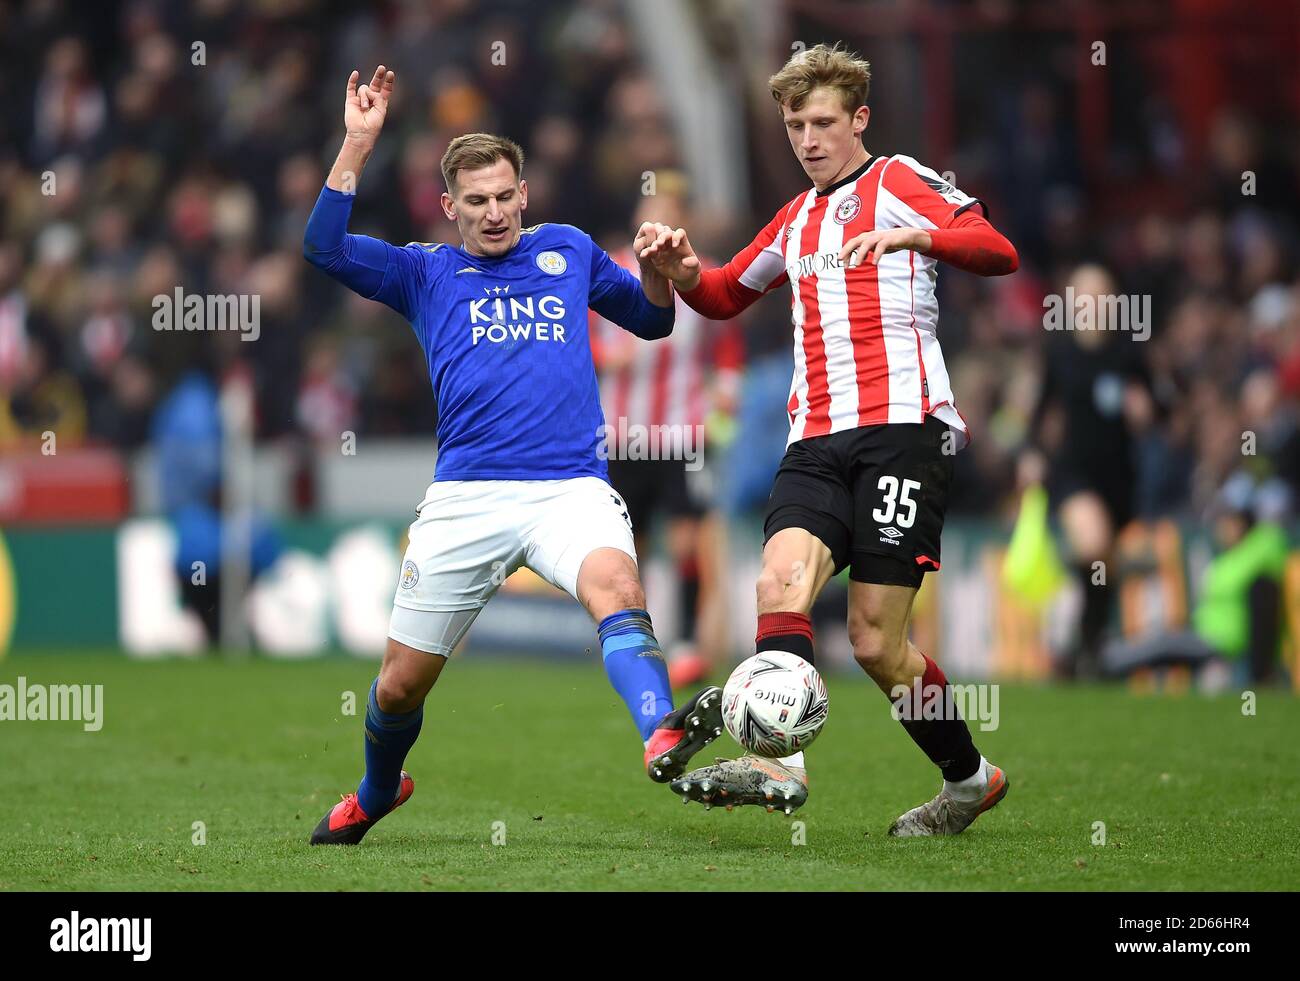 Leicester City's Marc Albrighton (left) and Brentford's Mads Roerslev Rasmussen battle for the ball Stock Photo